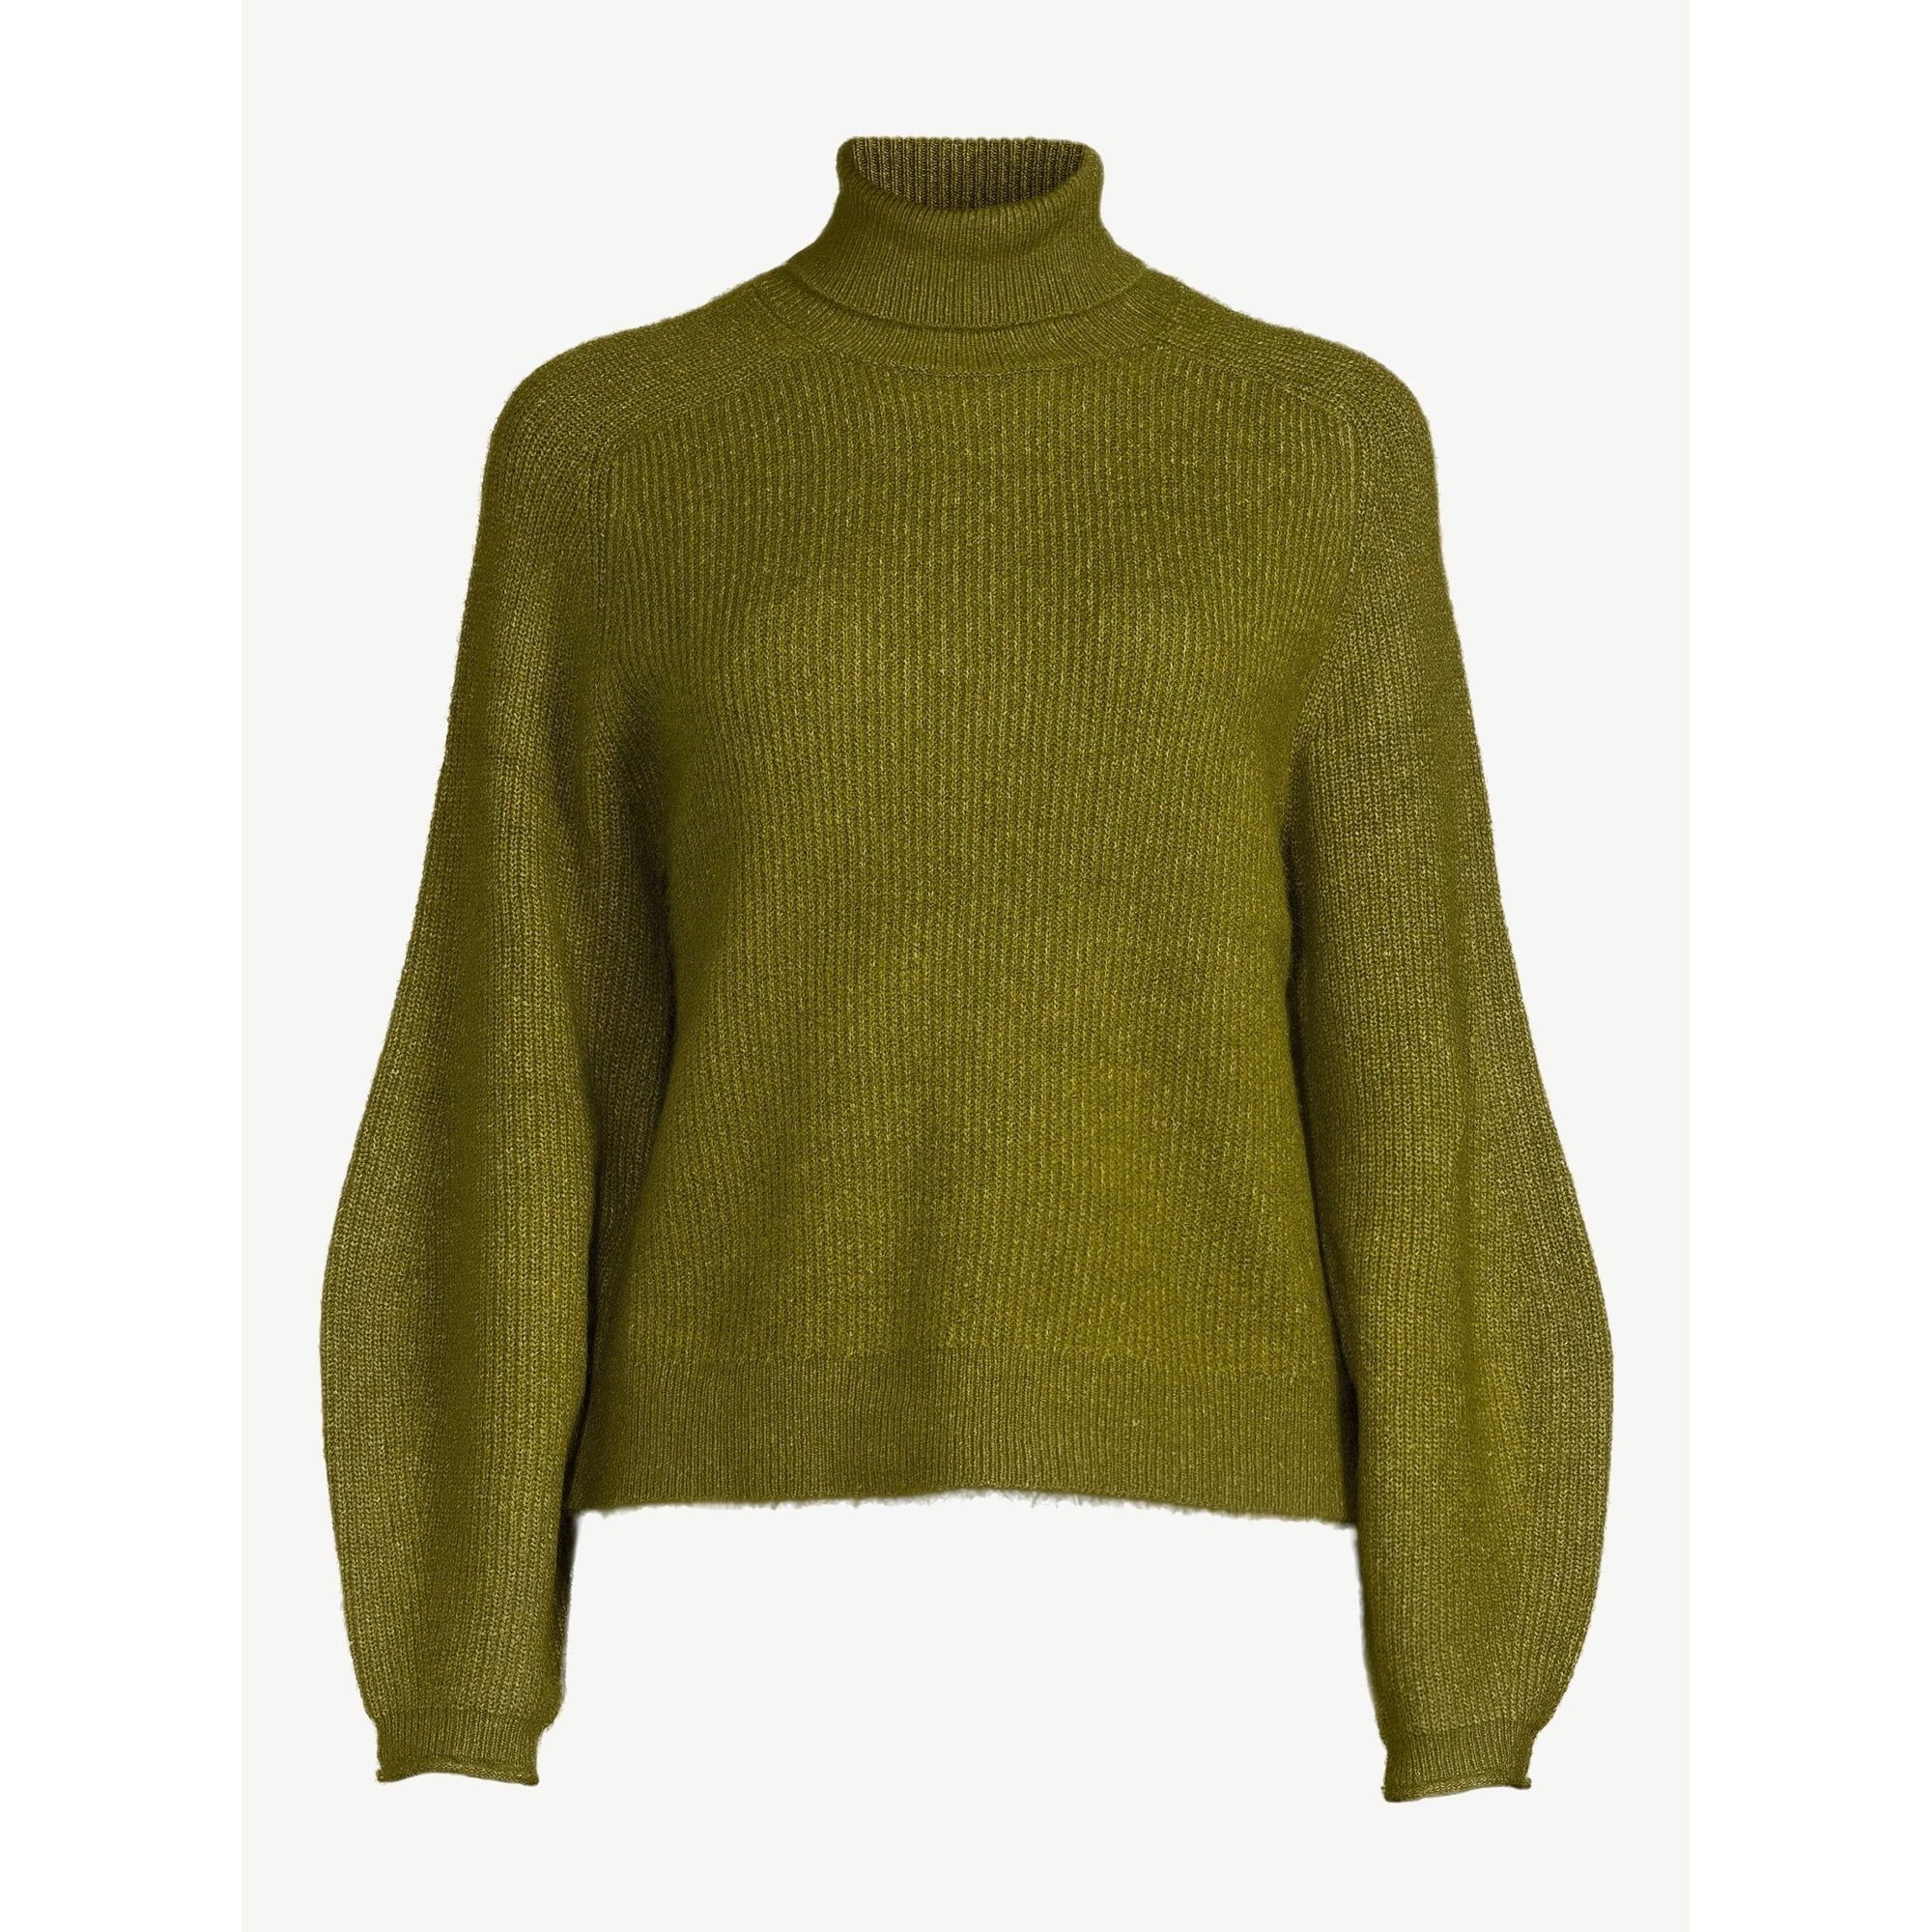 Scoop Women's Ribbed Oversized Turtleneck Sweater with Long Sleeves, Sizes XS-XXL | Walmart (US)